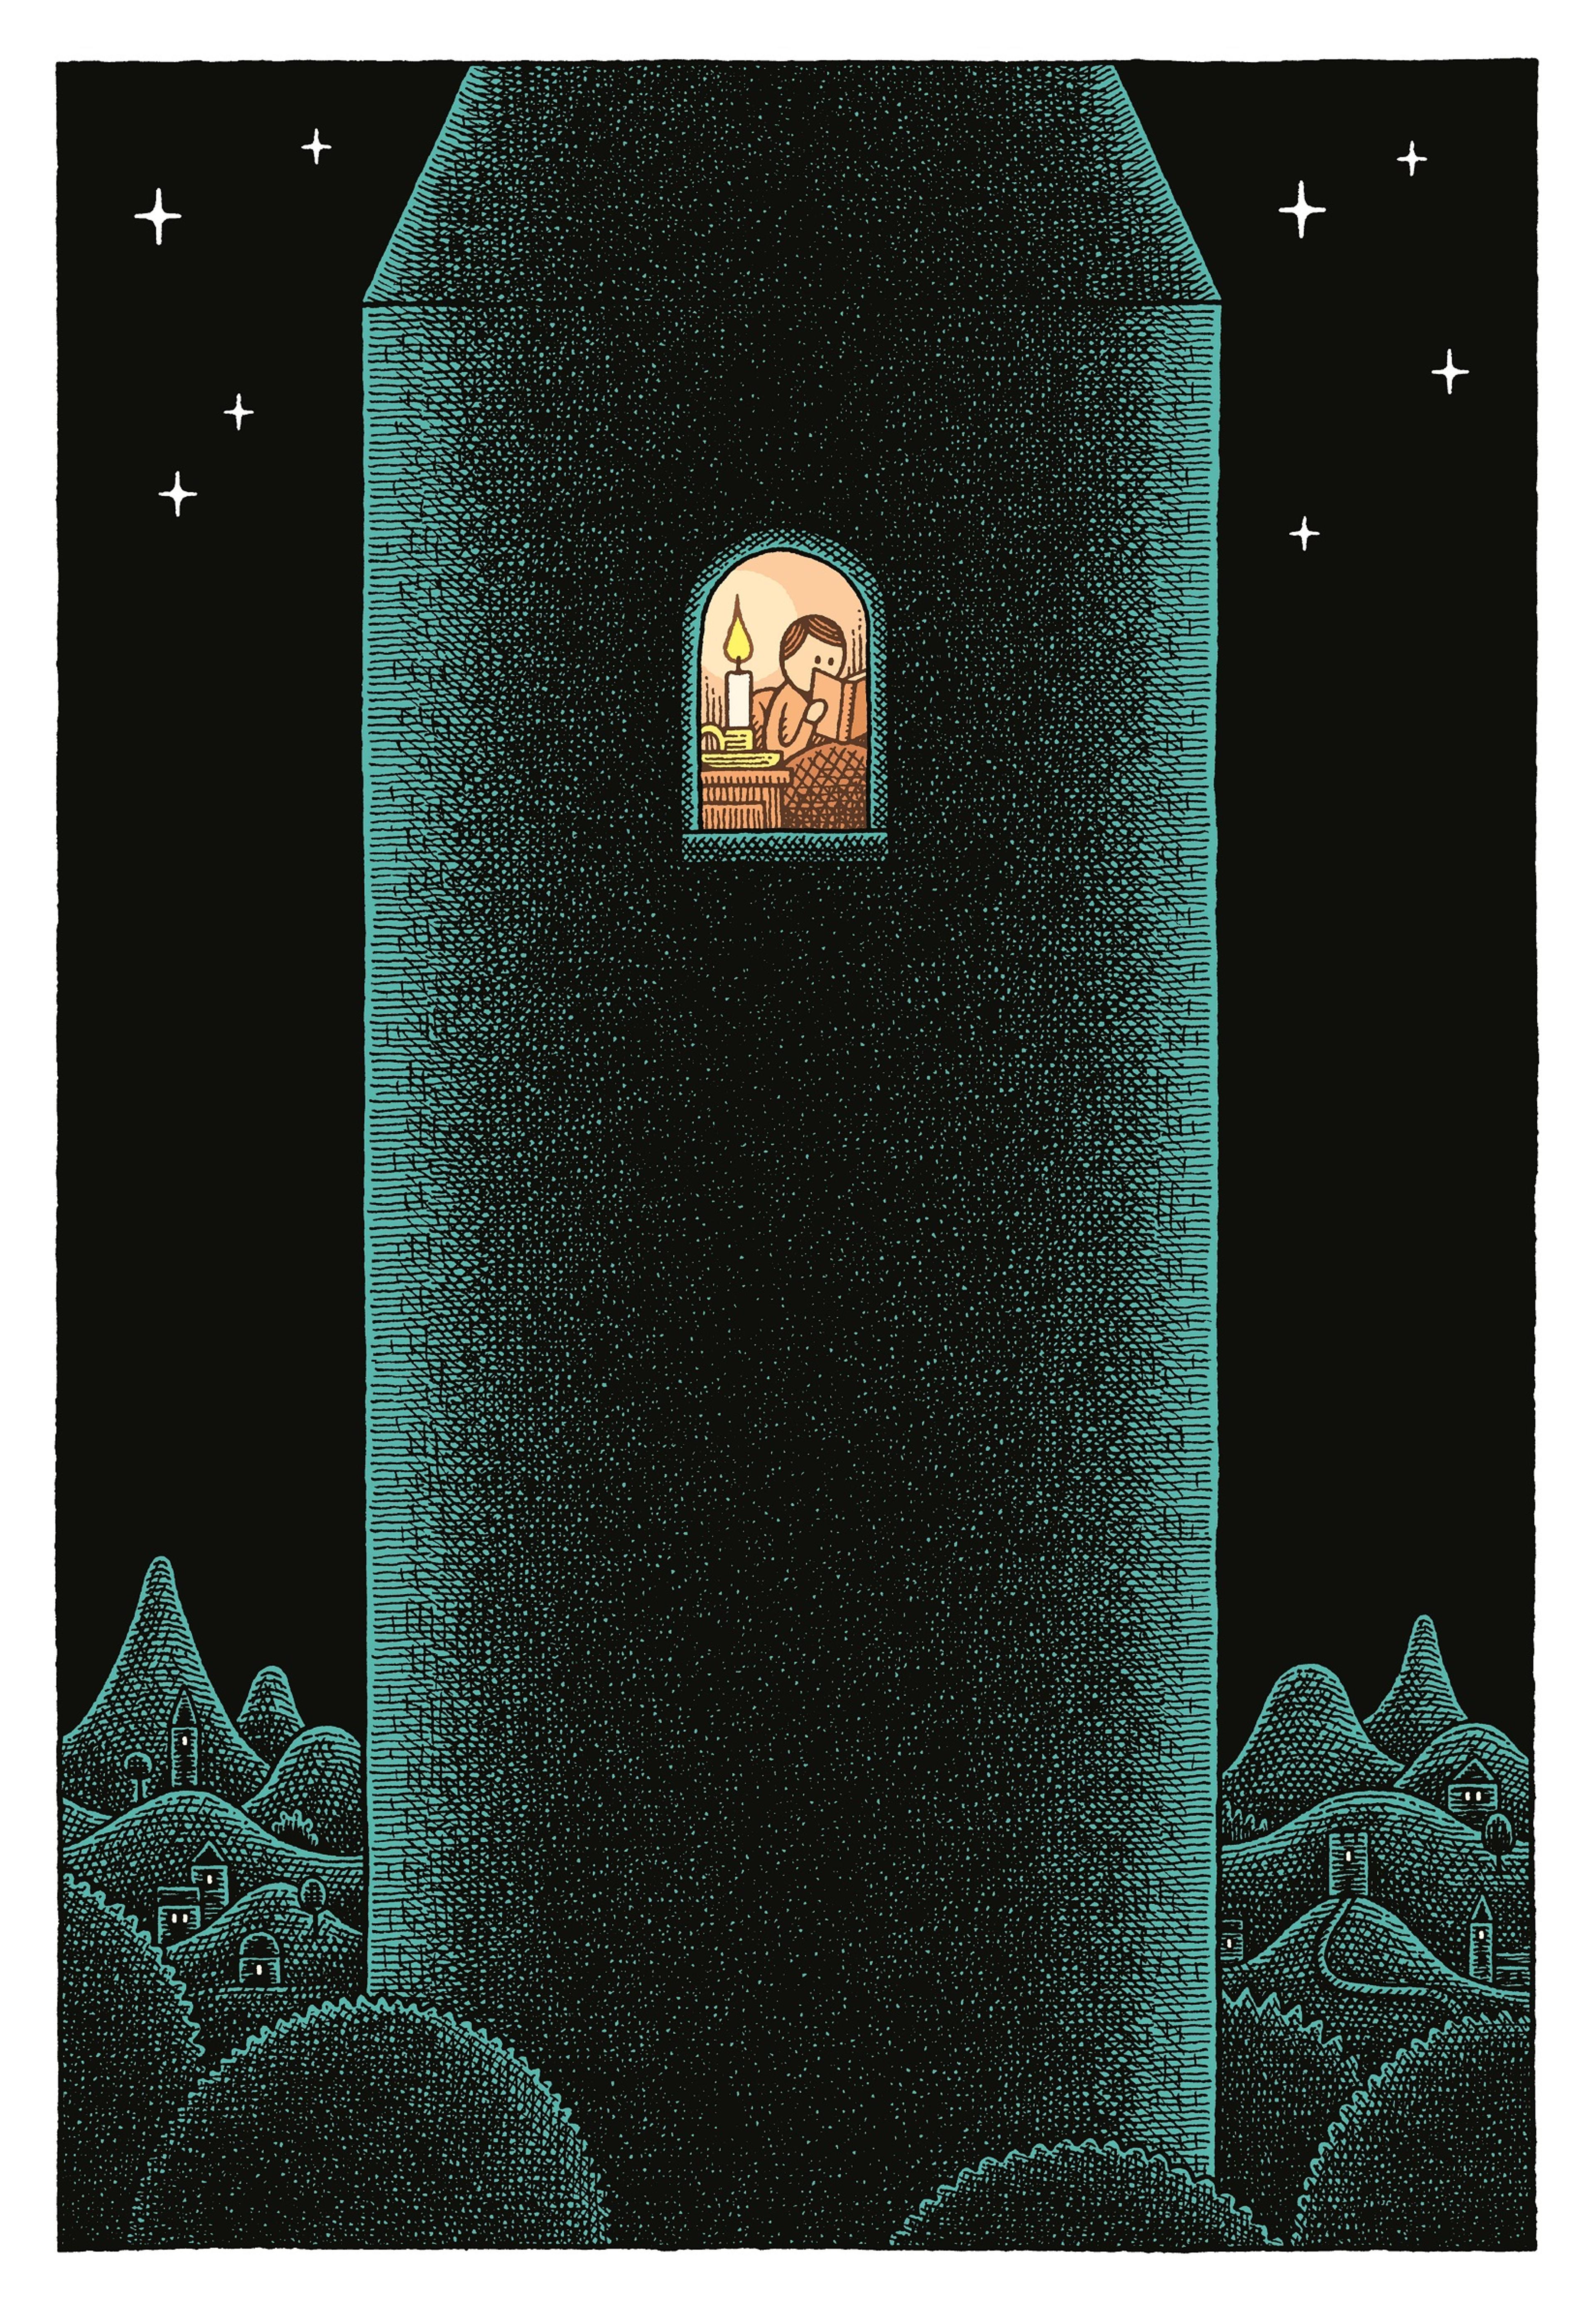 Illustration of a person reading by candlelight in a dark tower at night